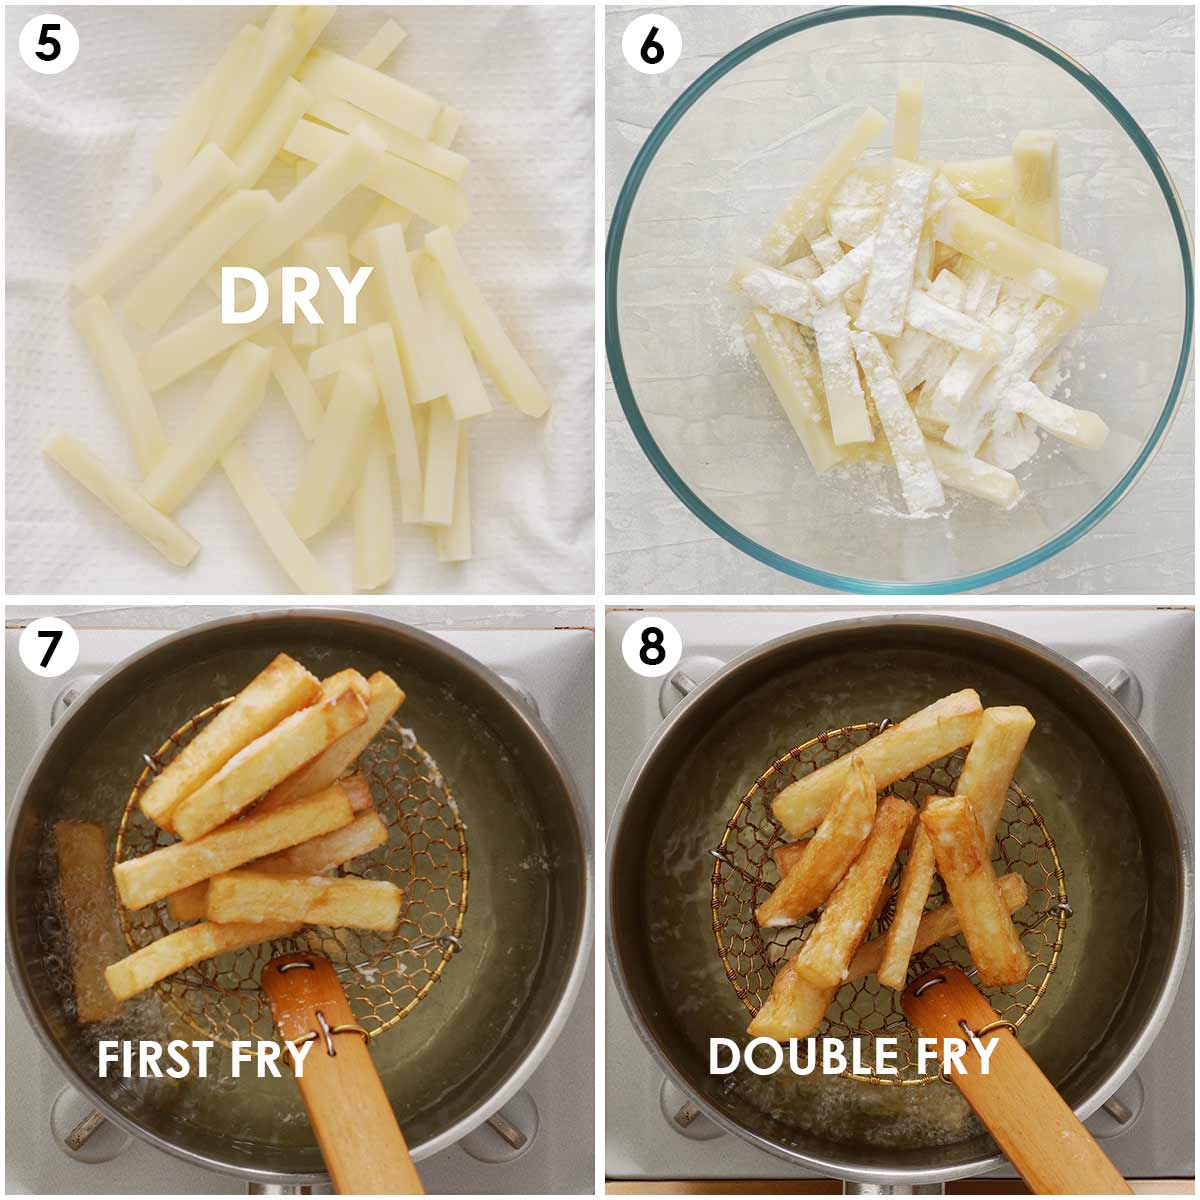 4 image collage showing how to coat and double fry chips.